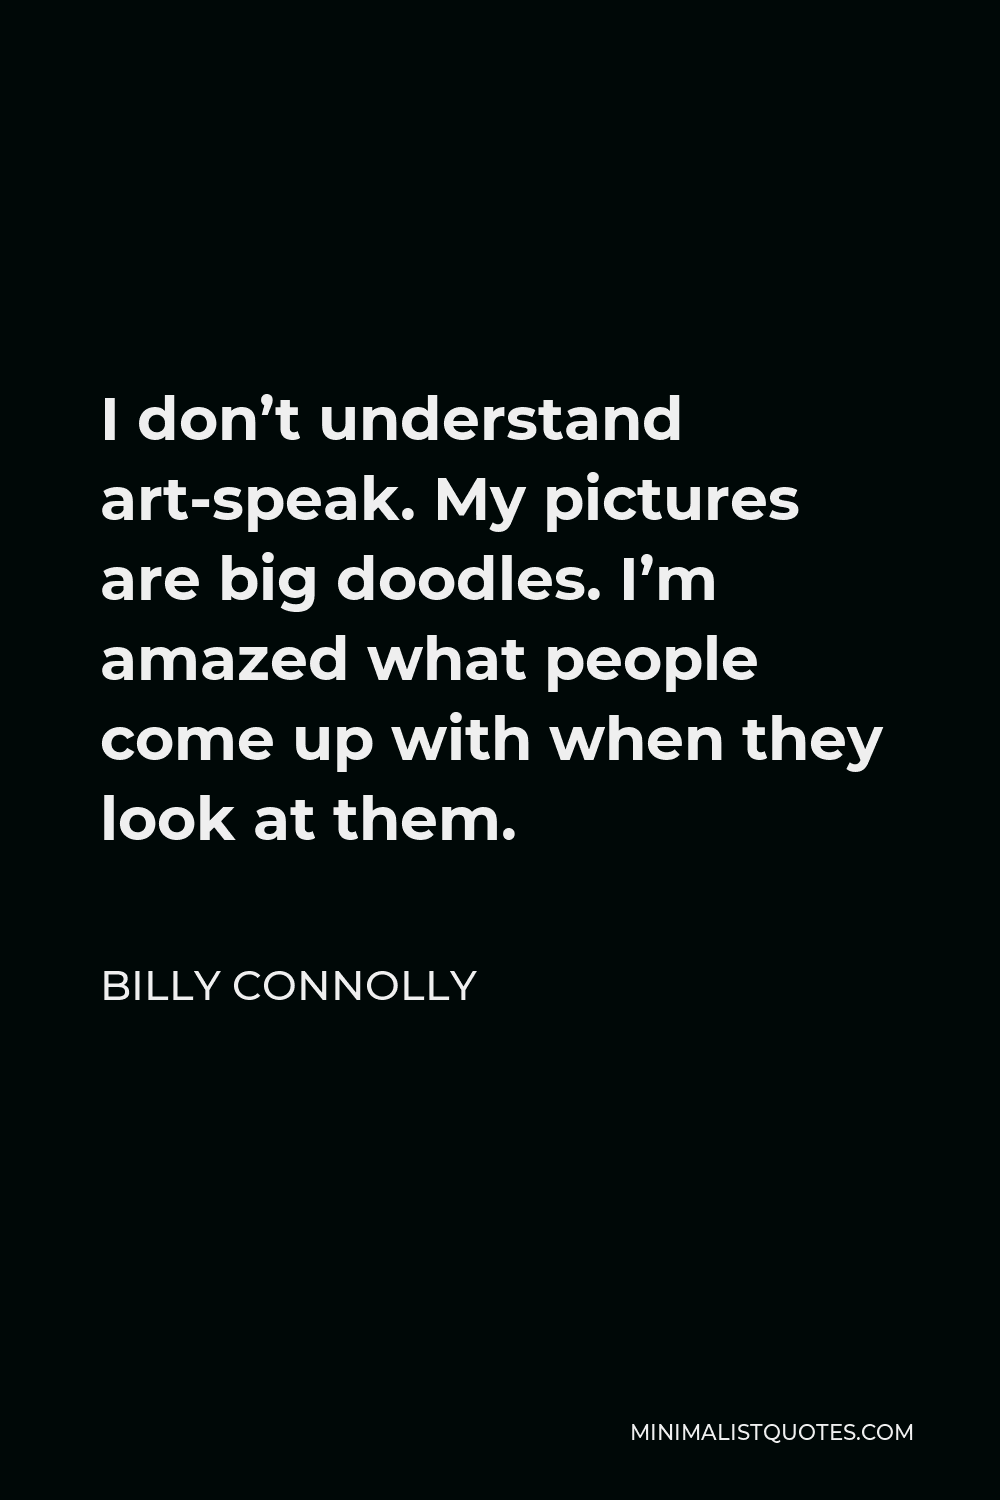 Billy Connolly Quote - I don’t understand art-speak. My pictures are big doodles. I’m amazed what people come up with when they look at them.